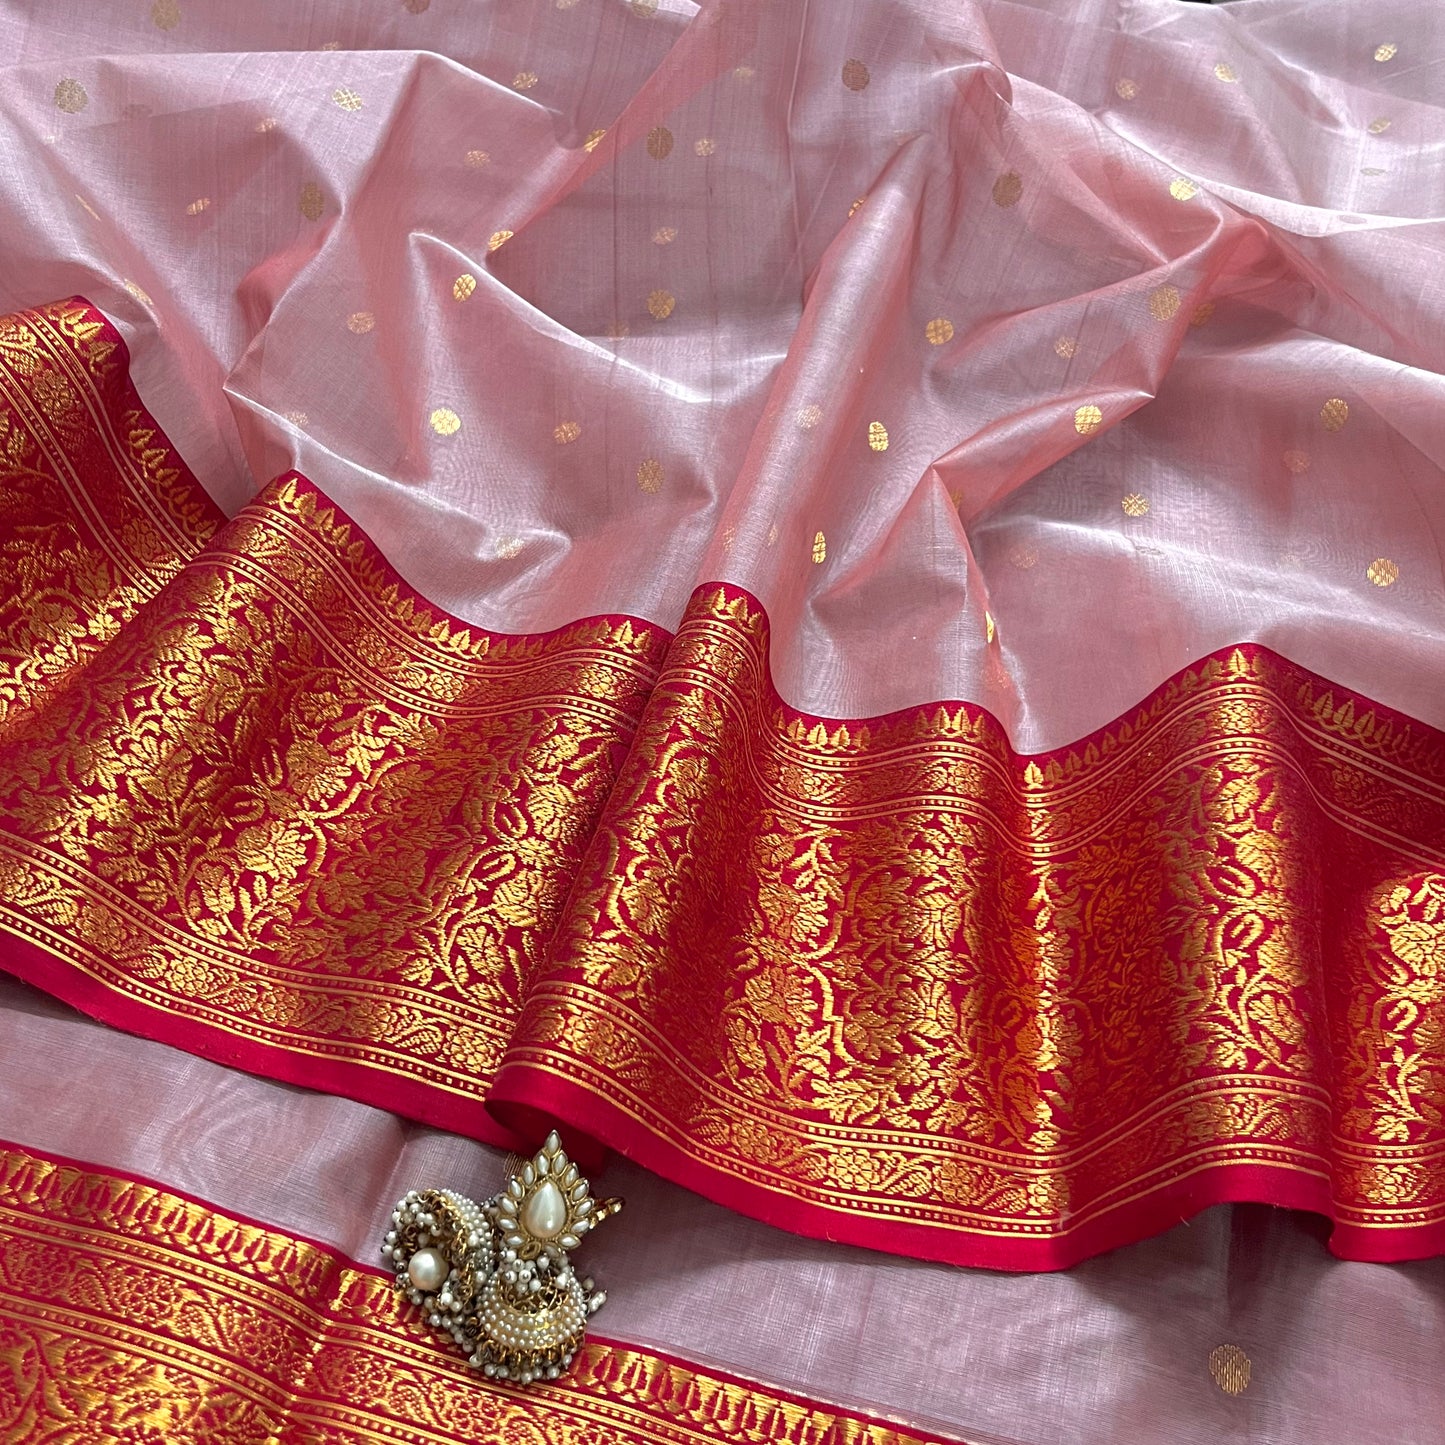 Dusty pink and red chanderi katan silk saree with zari bootis all over